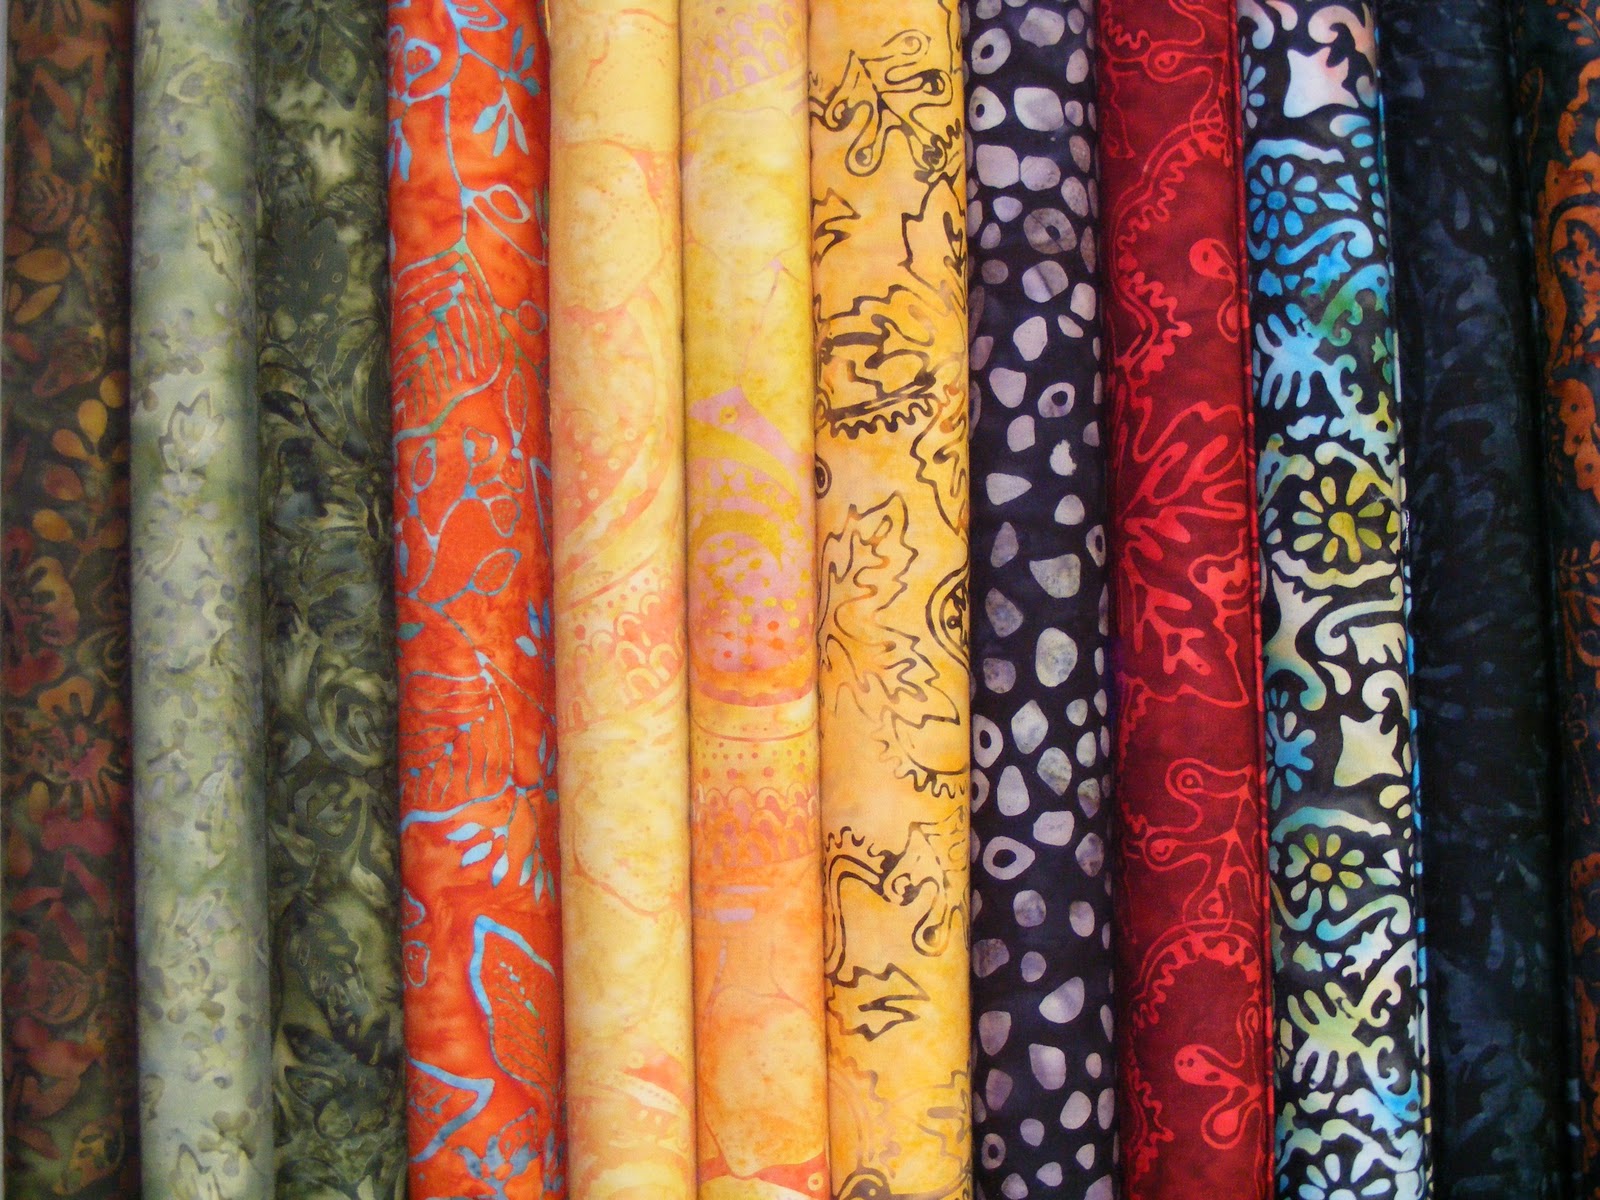 Quilt & Stitch: Lots of yummy fabric